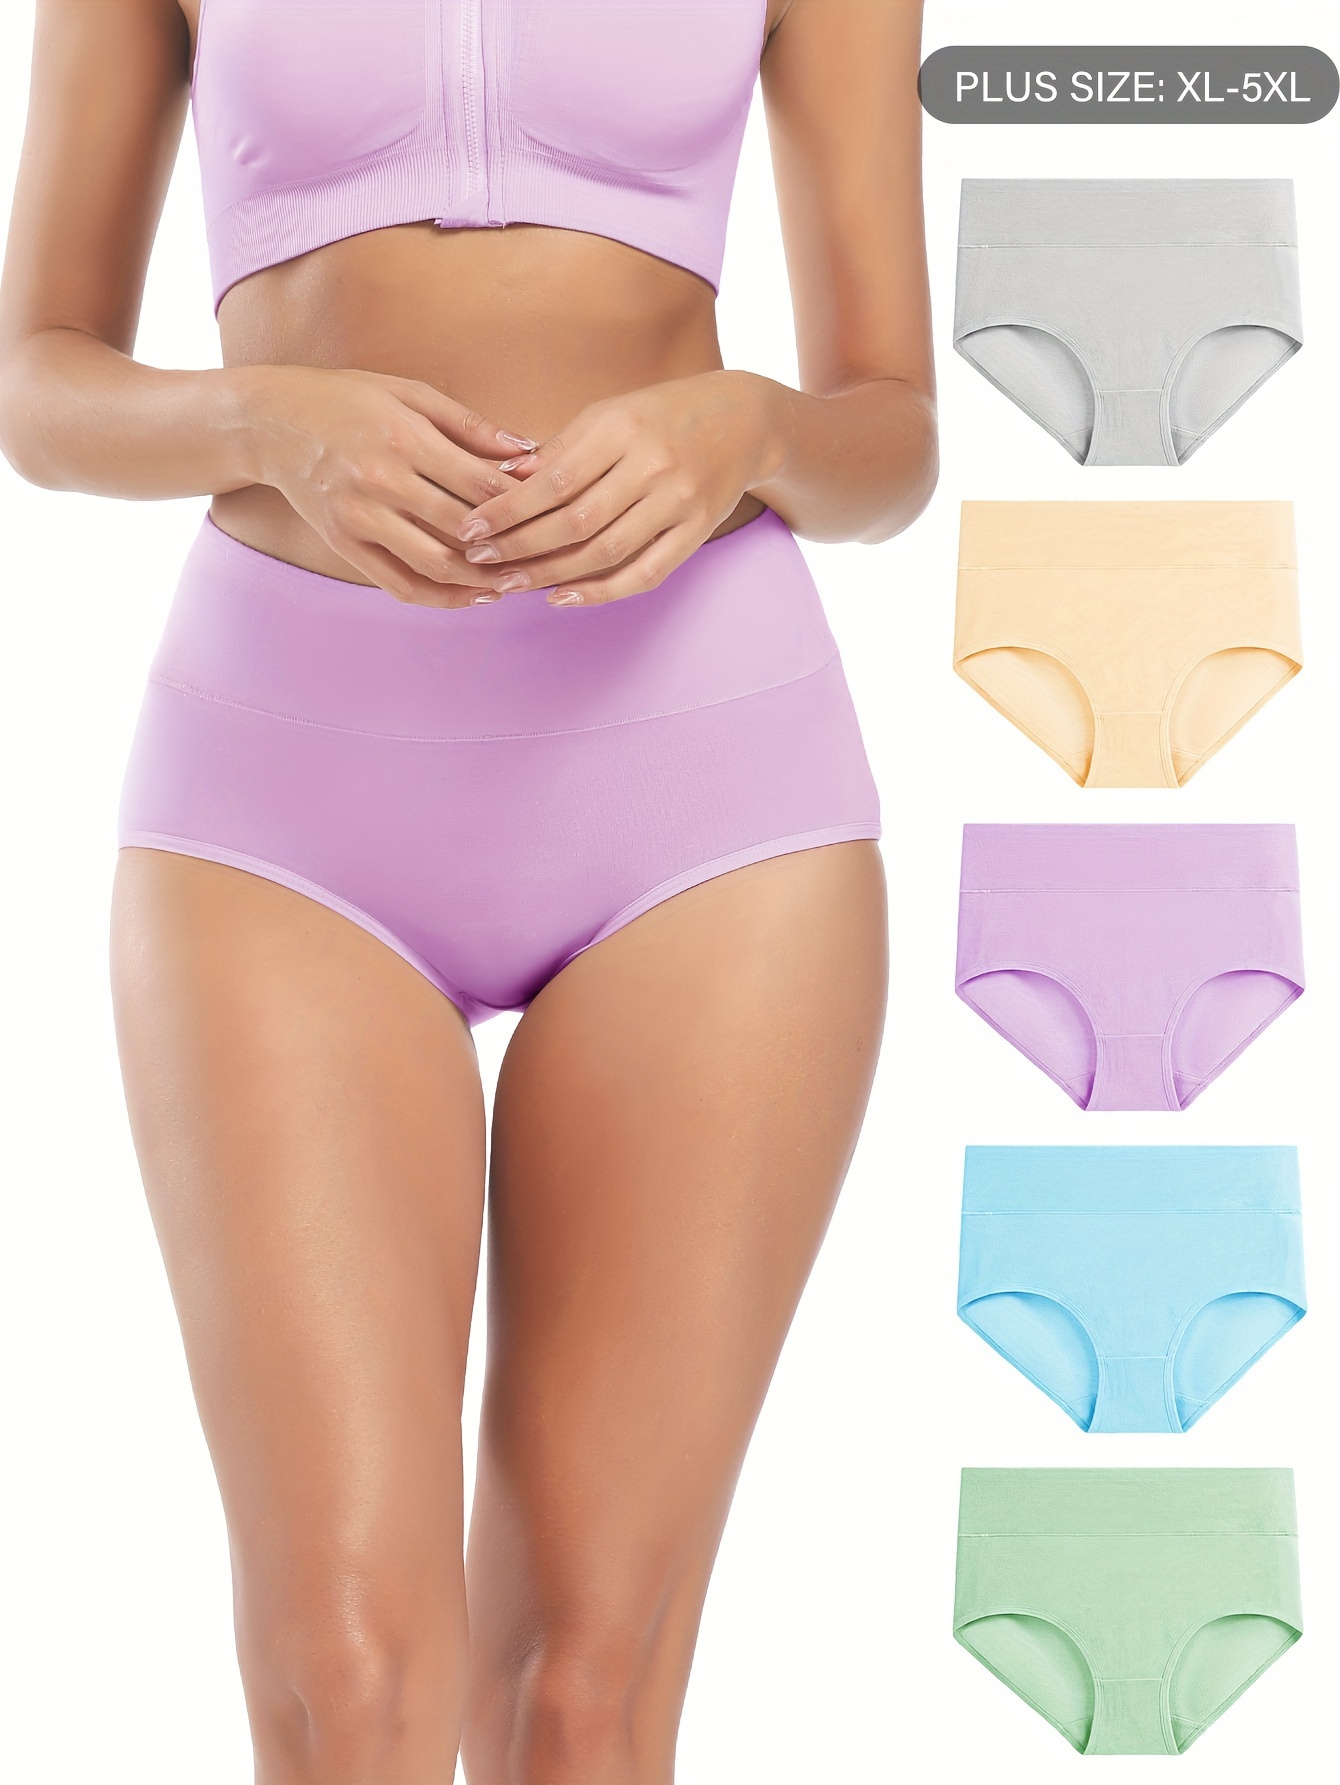 5pcs Solid Simple Boyshorts Panties, Comfy & Soft High Waisted Full Cover  Panties, Women's Lingerie & Underwear